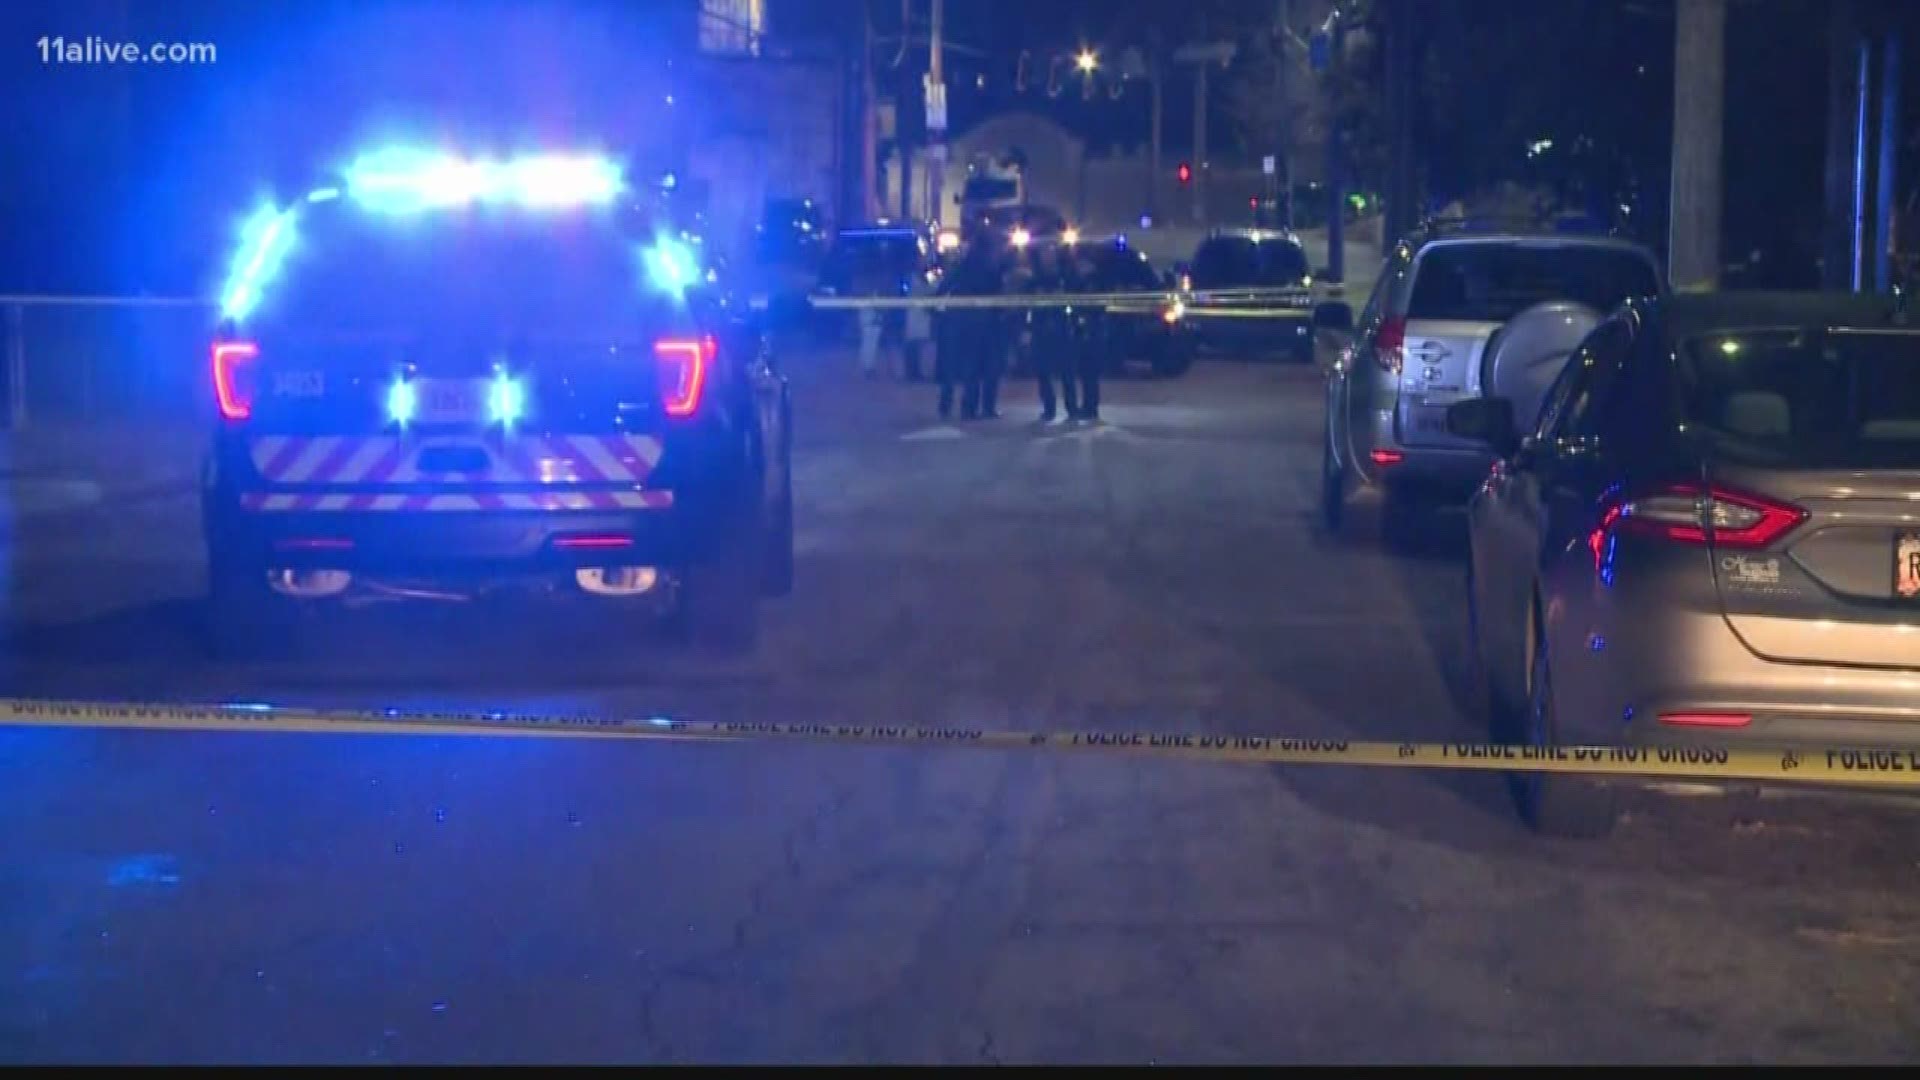 Police found 14 shell casings in the area after the shooting, the report said.